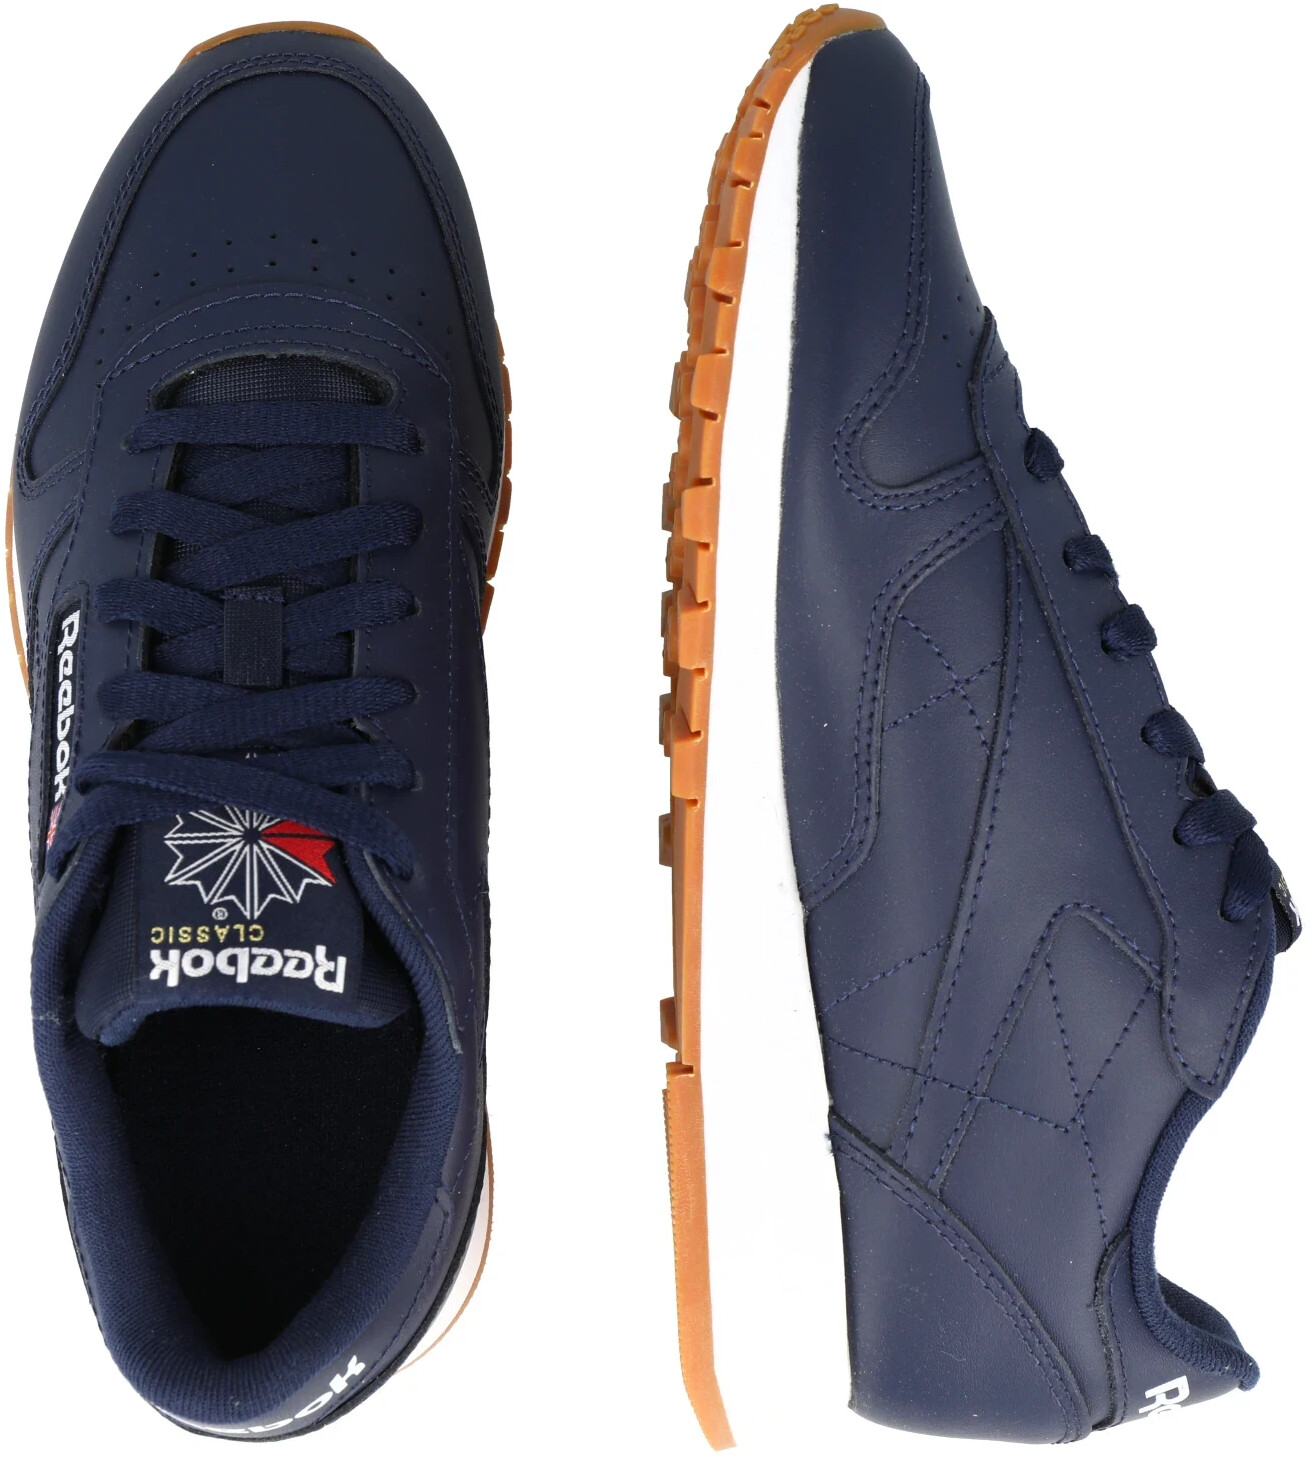 Classic Leather Shoes - Vector Navy / Ftwr White / Reebok Rubber Gum-03 |  Reebok